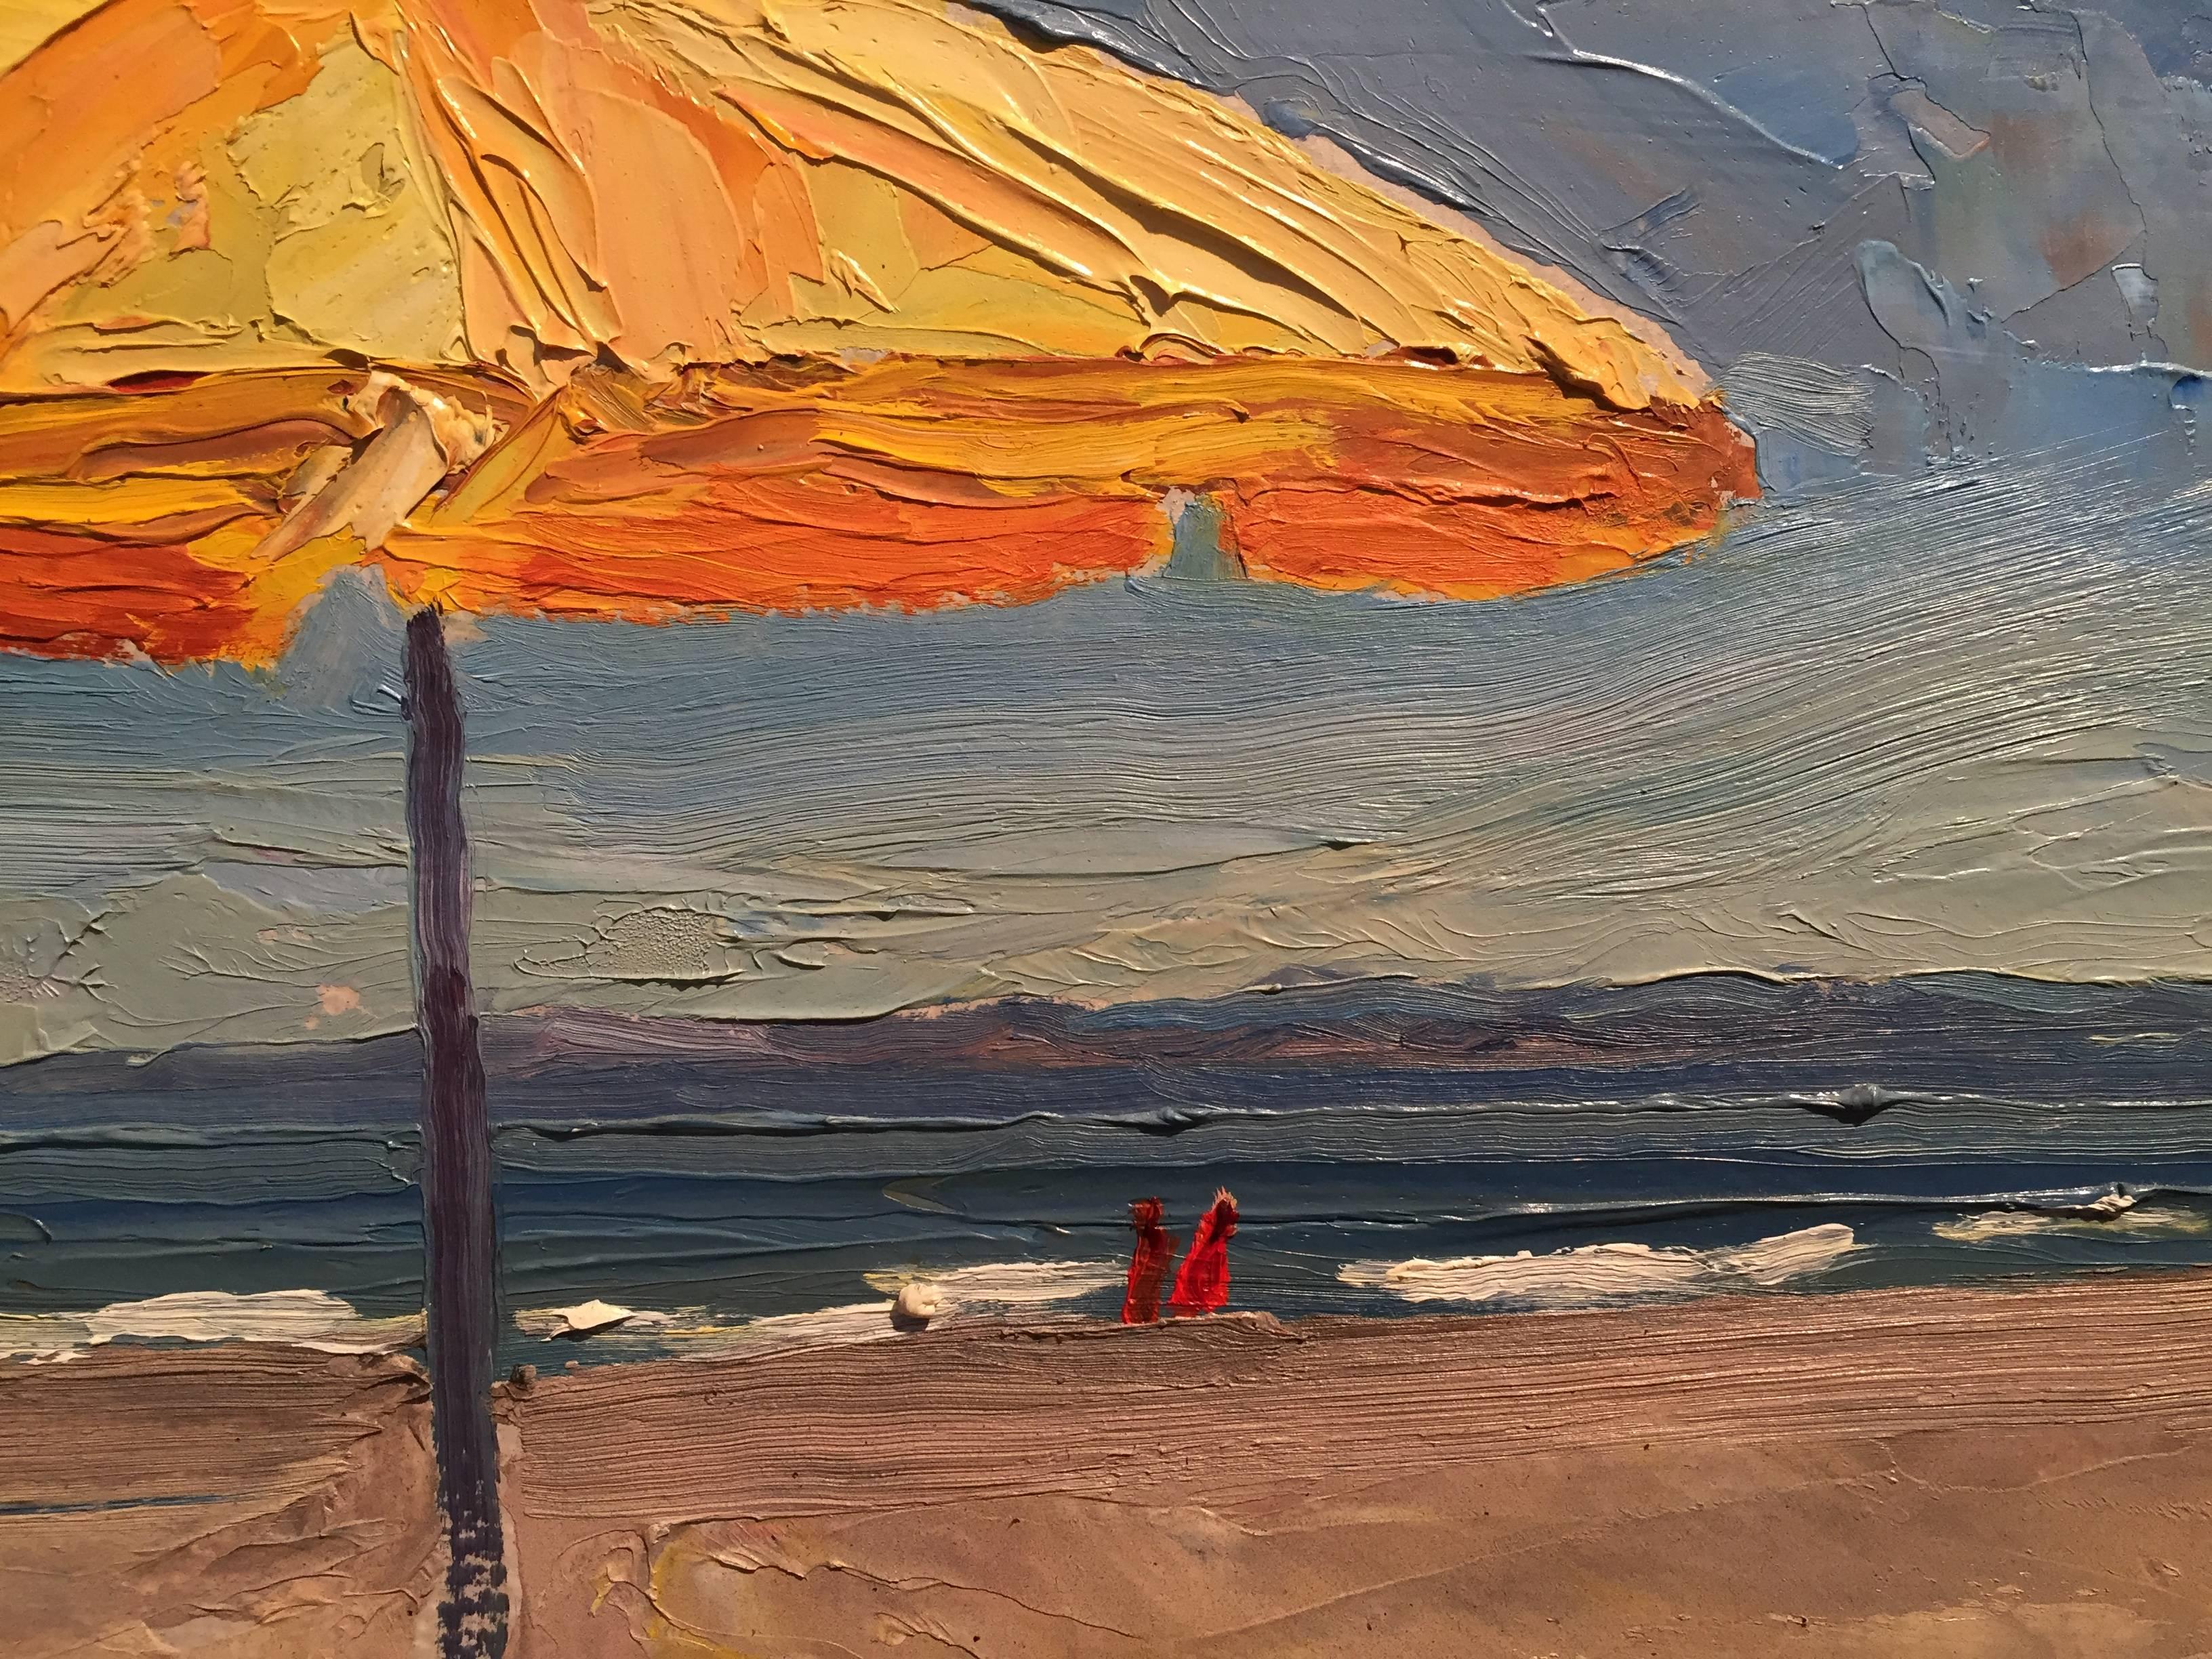 A Yellow Umbrella painted en plein-air on a beach in Italy, a distant couple walk along the shore in red garments, a white sailboat soars across the horizon.

Nelson H. White was born in New London, Connecticut in 1932. White has been surrounded by